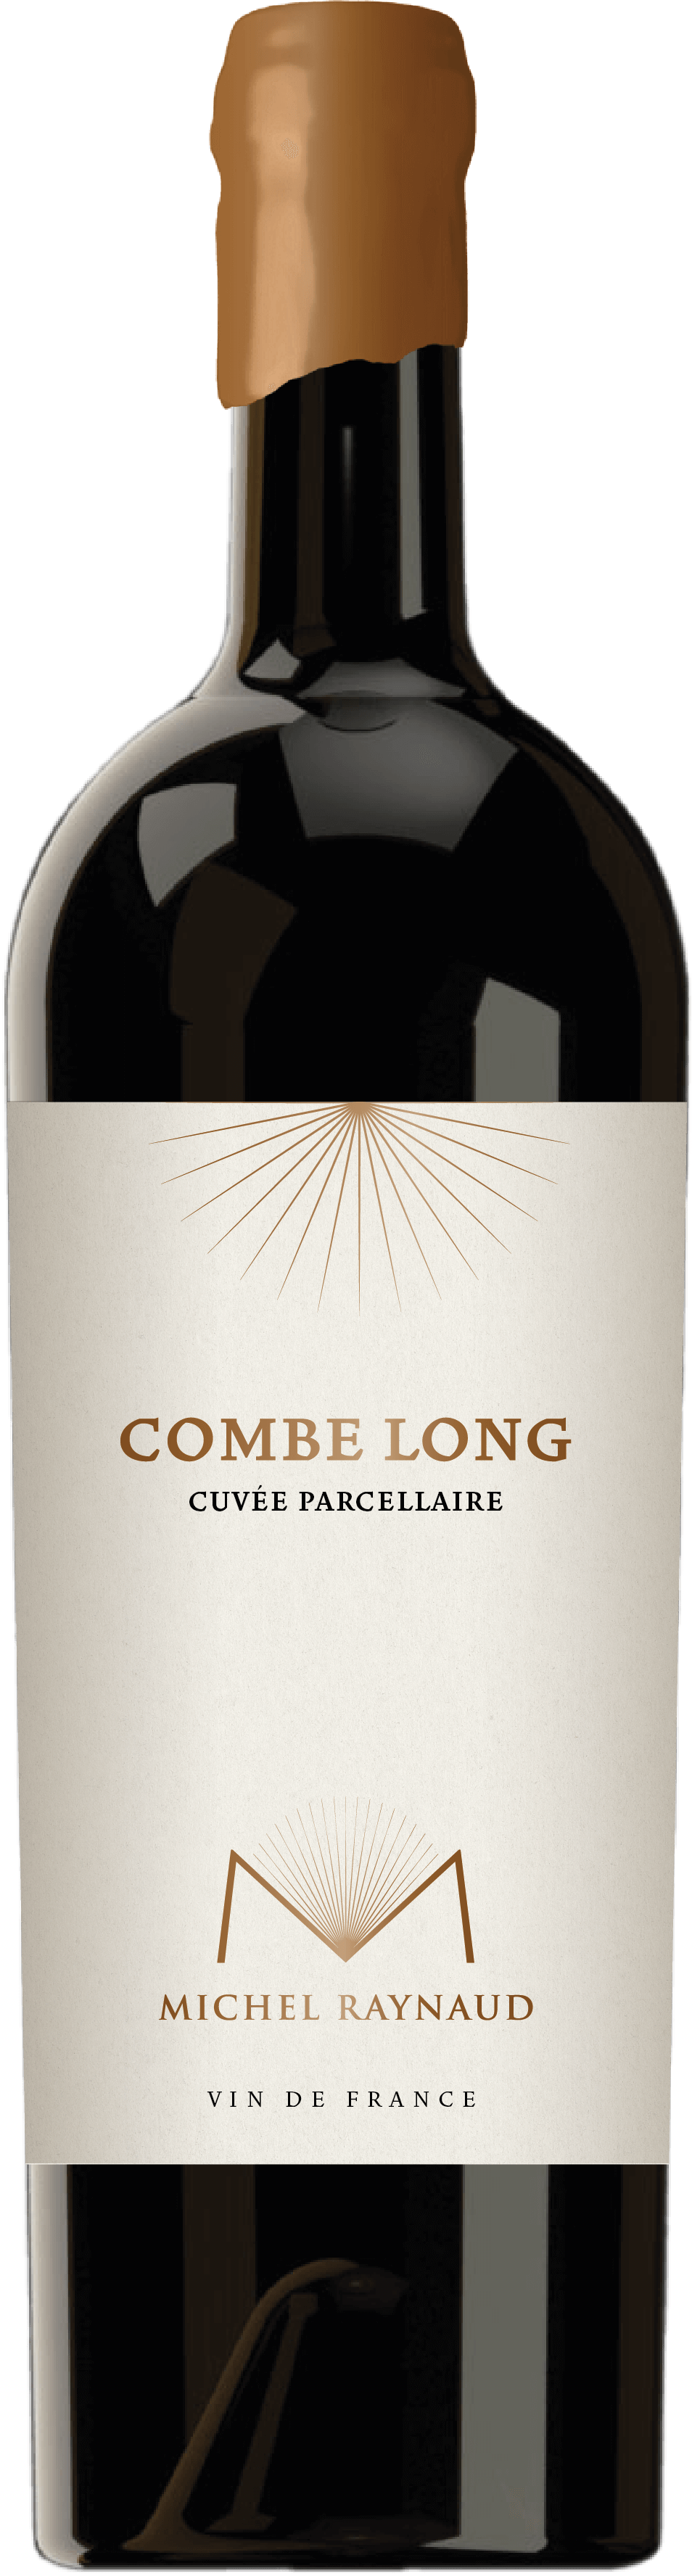 Combe Long – Vin de France rouge - Michel Raynaud